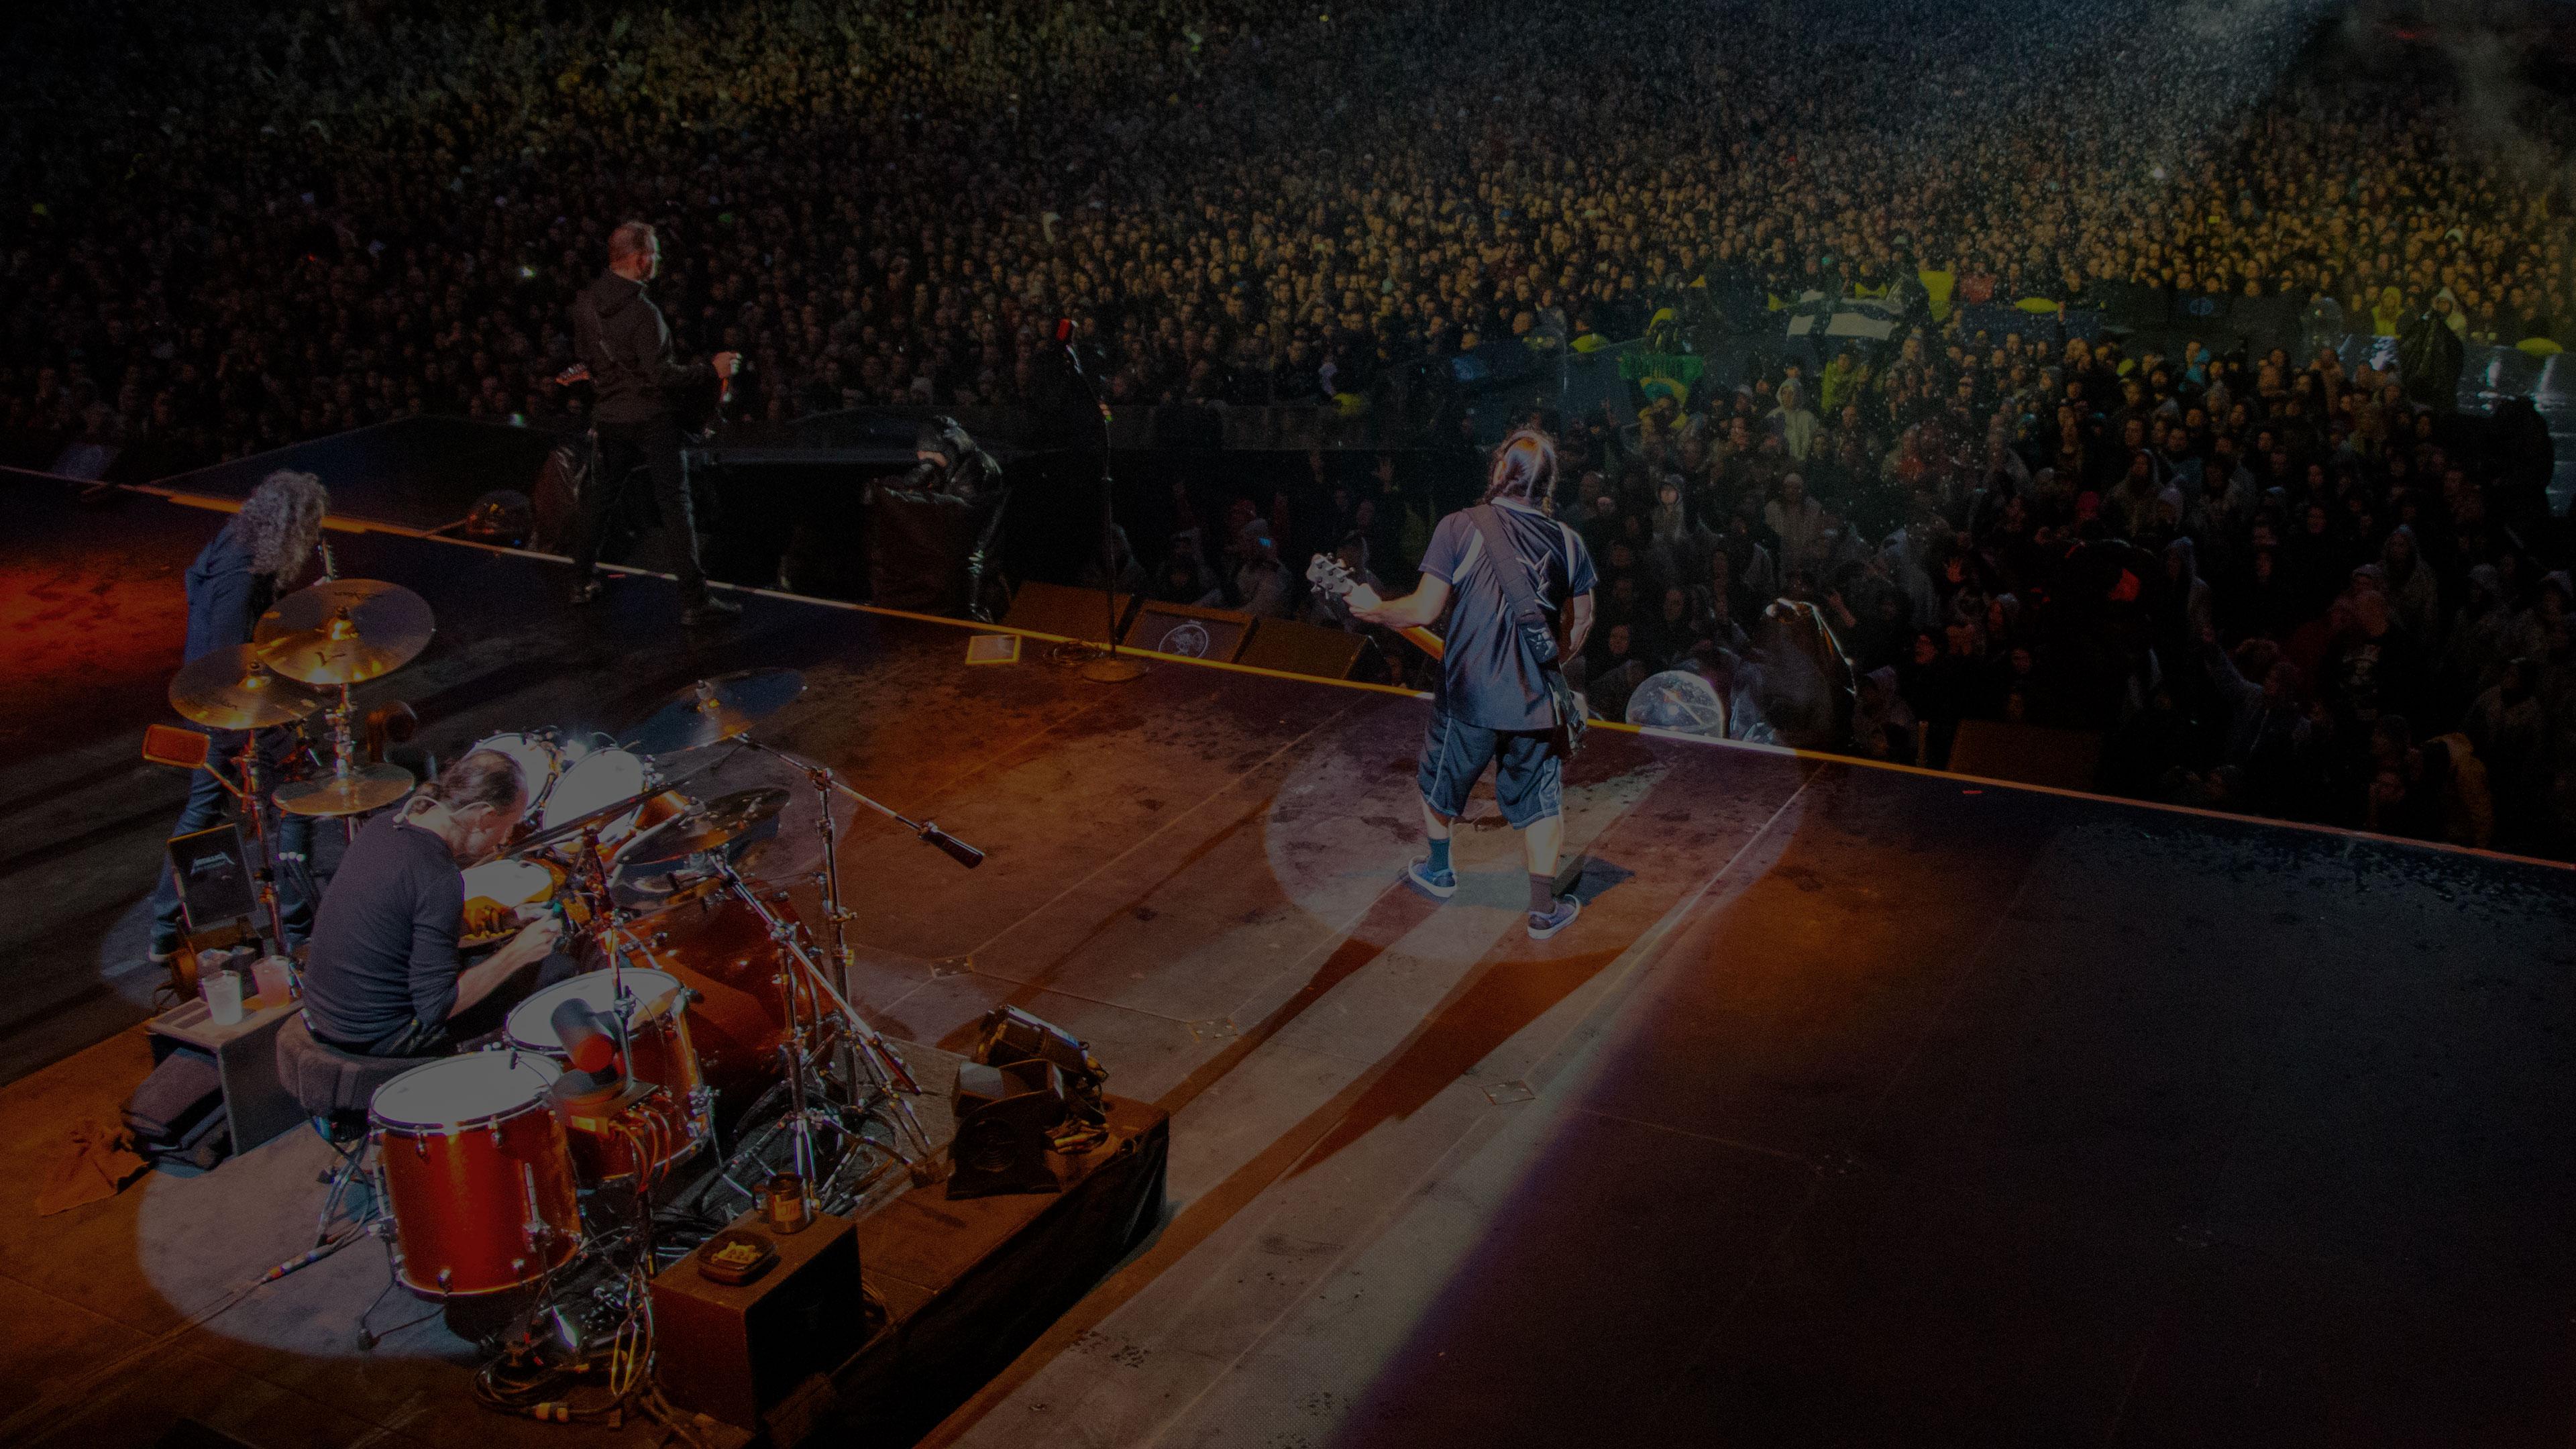 Banner Image for the photo gallery from the gig in Helsinki, Finland shot on May 28, 2014